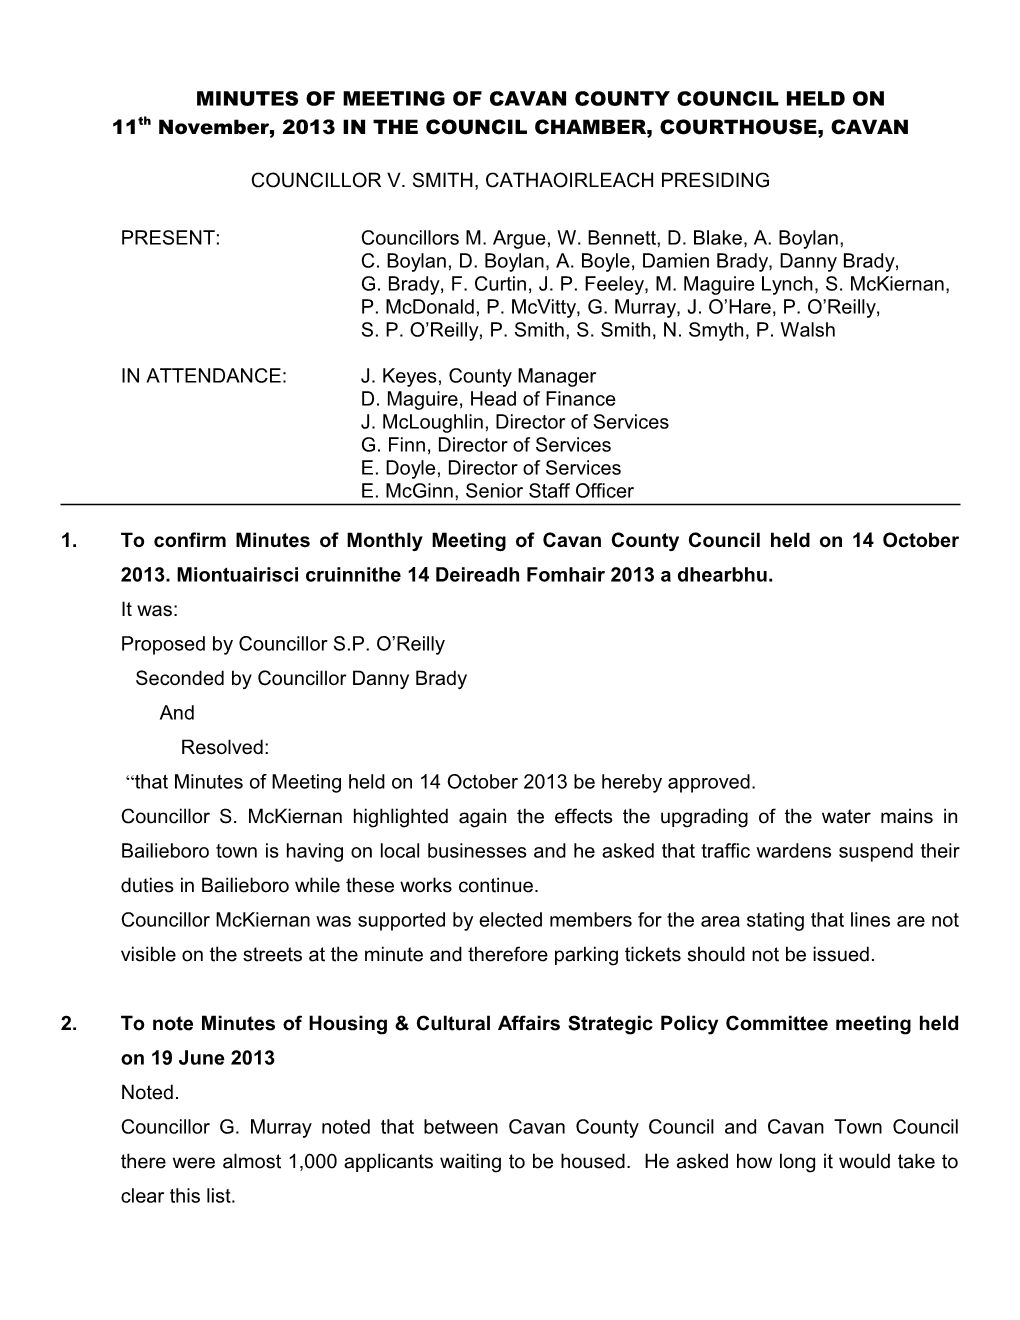 Minutes of Council Meeting Held on 11Th October 2010 s3